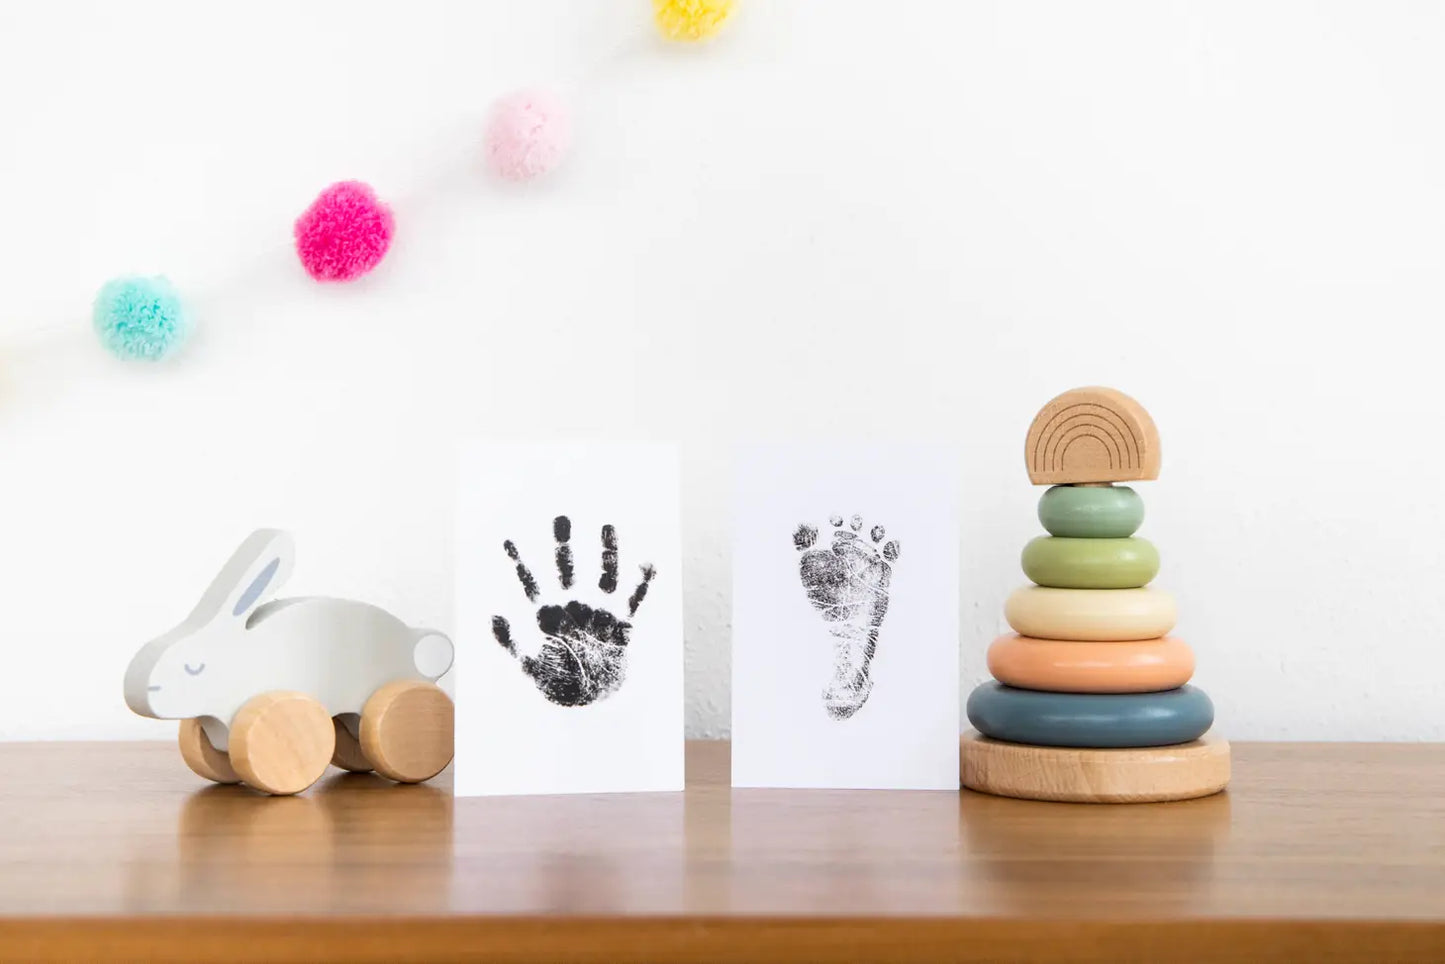 Baby Handprint or Footprint Clean-Touch Ink Pad Kit